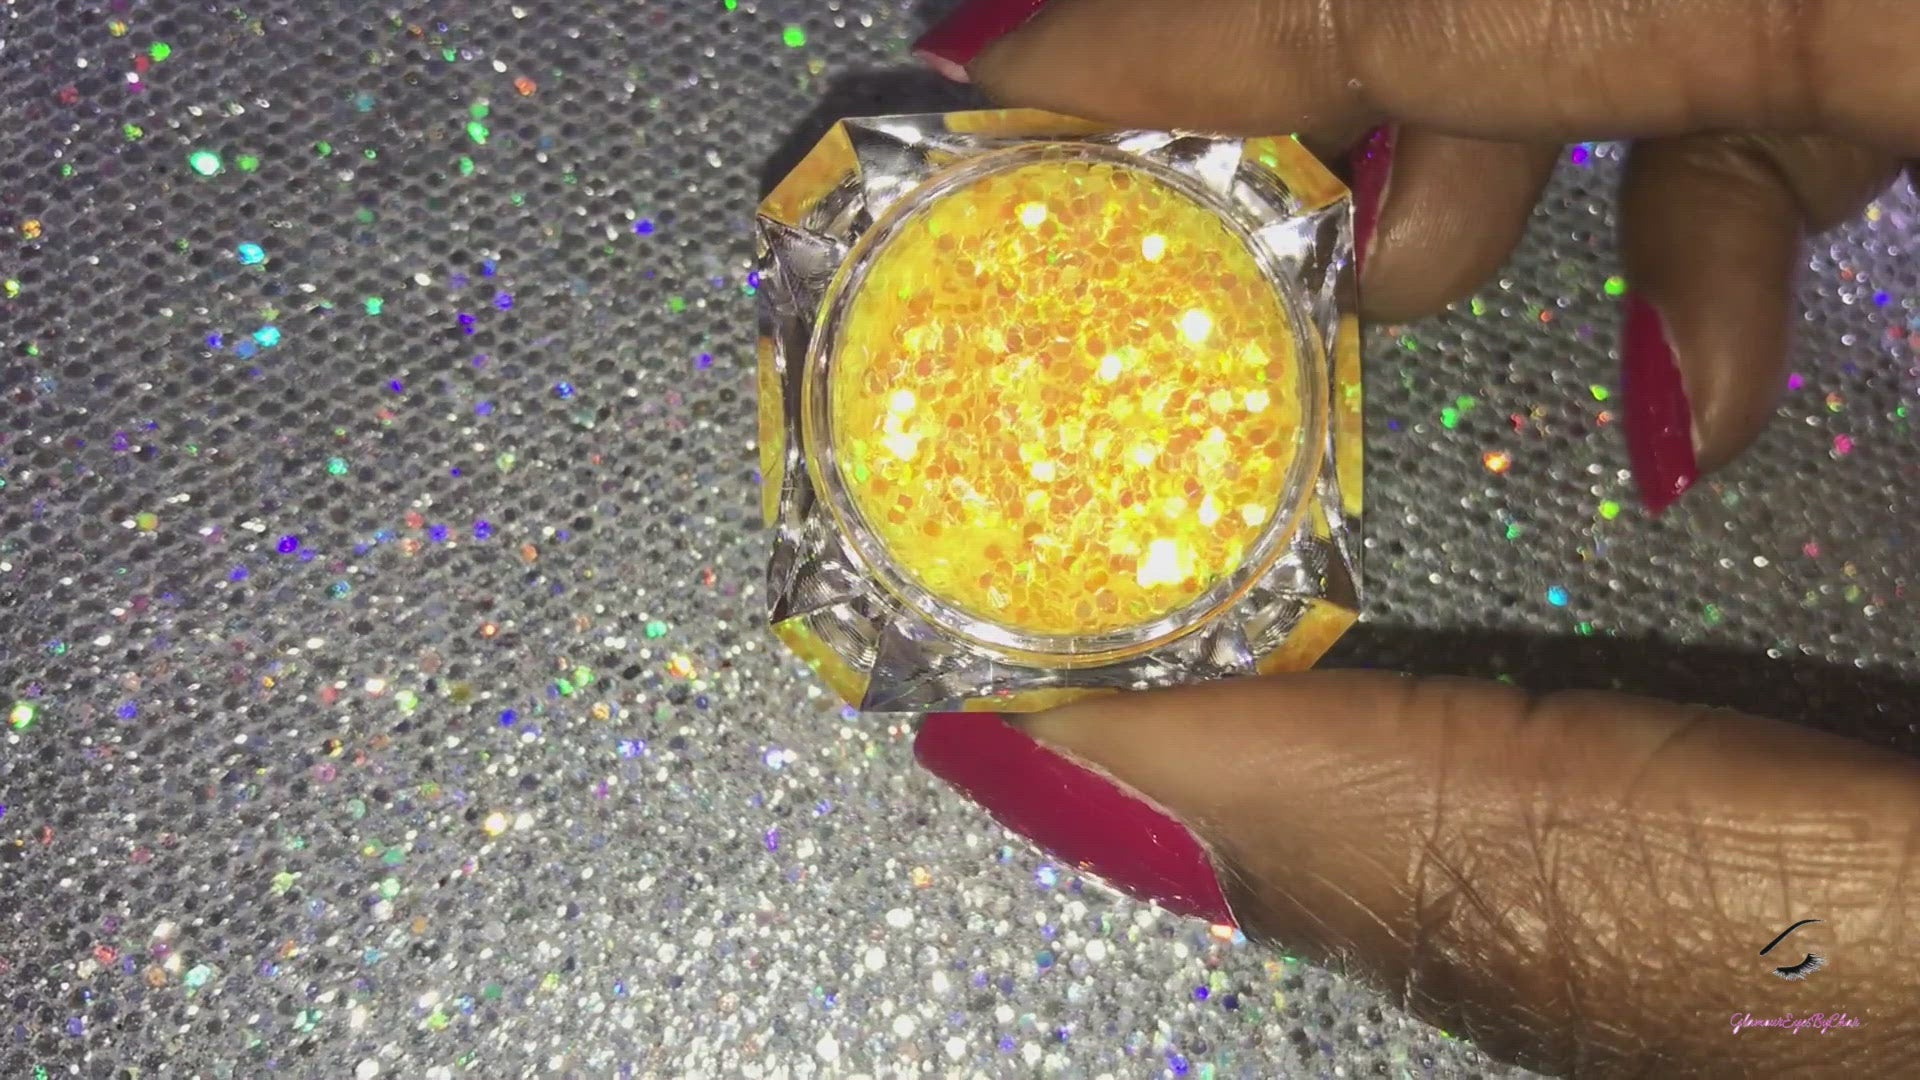 This glitter is called Lemon Drops and is part of the simple glitter collection. It consists of bright yellow glitter with an iridescent sparkle. Flake size is larger than fine and extra fine glitter. Lemon Drops can be used for your face, body, hair and nails.